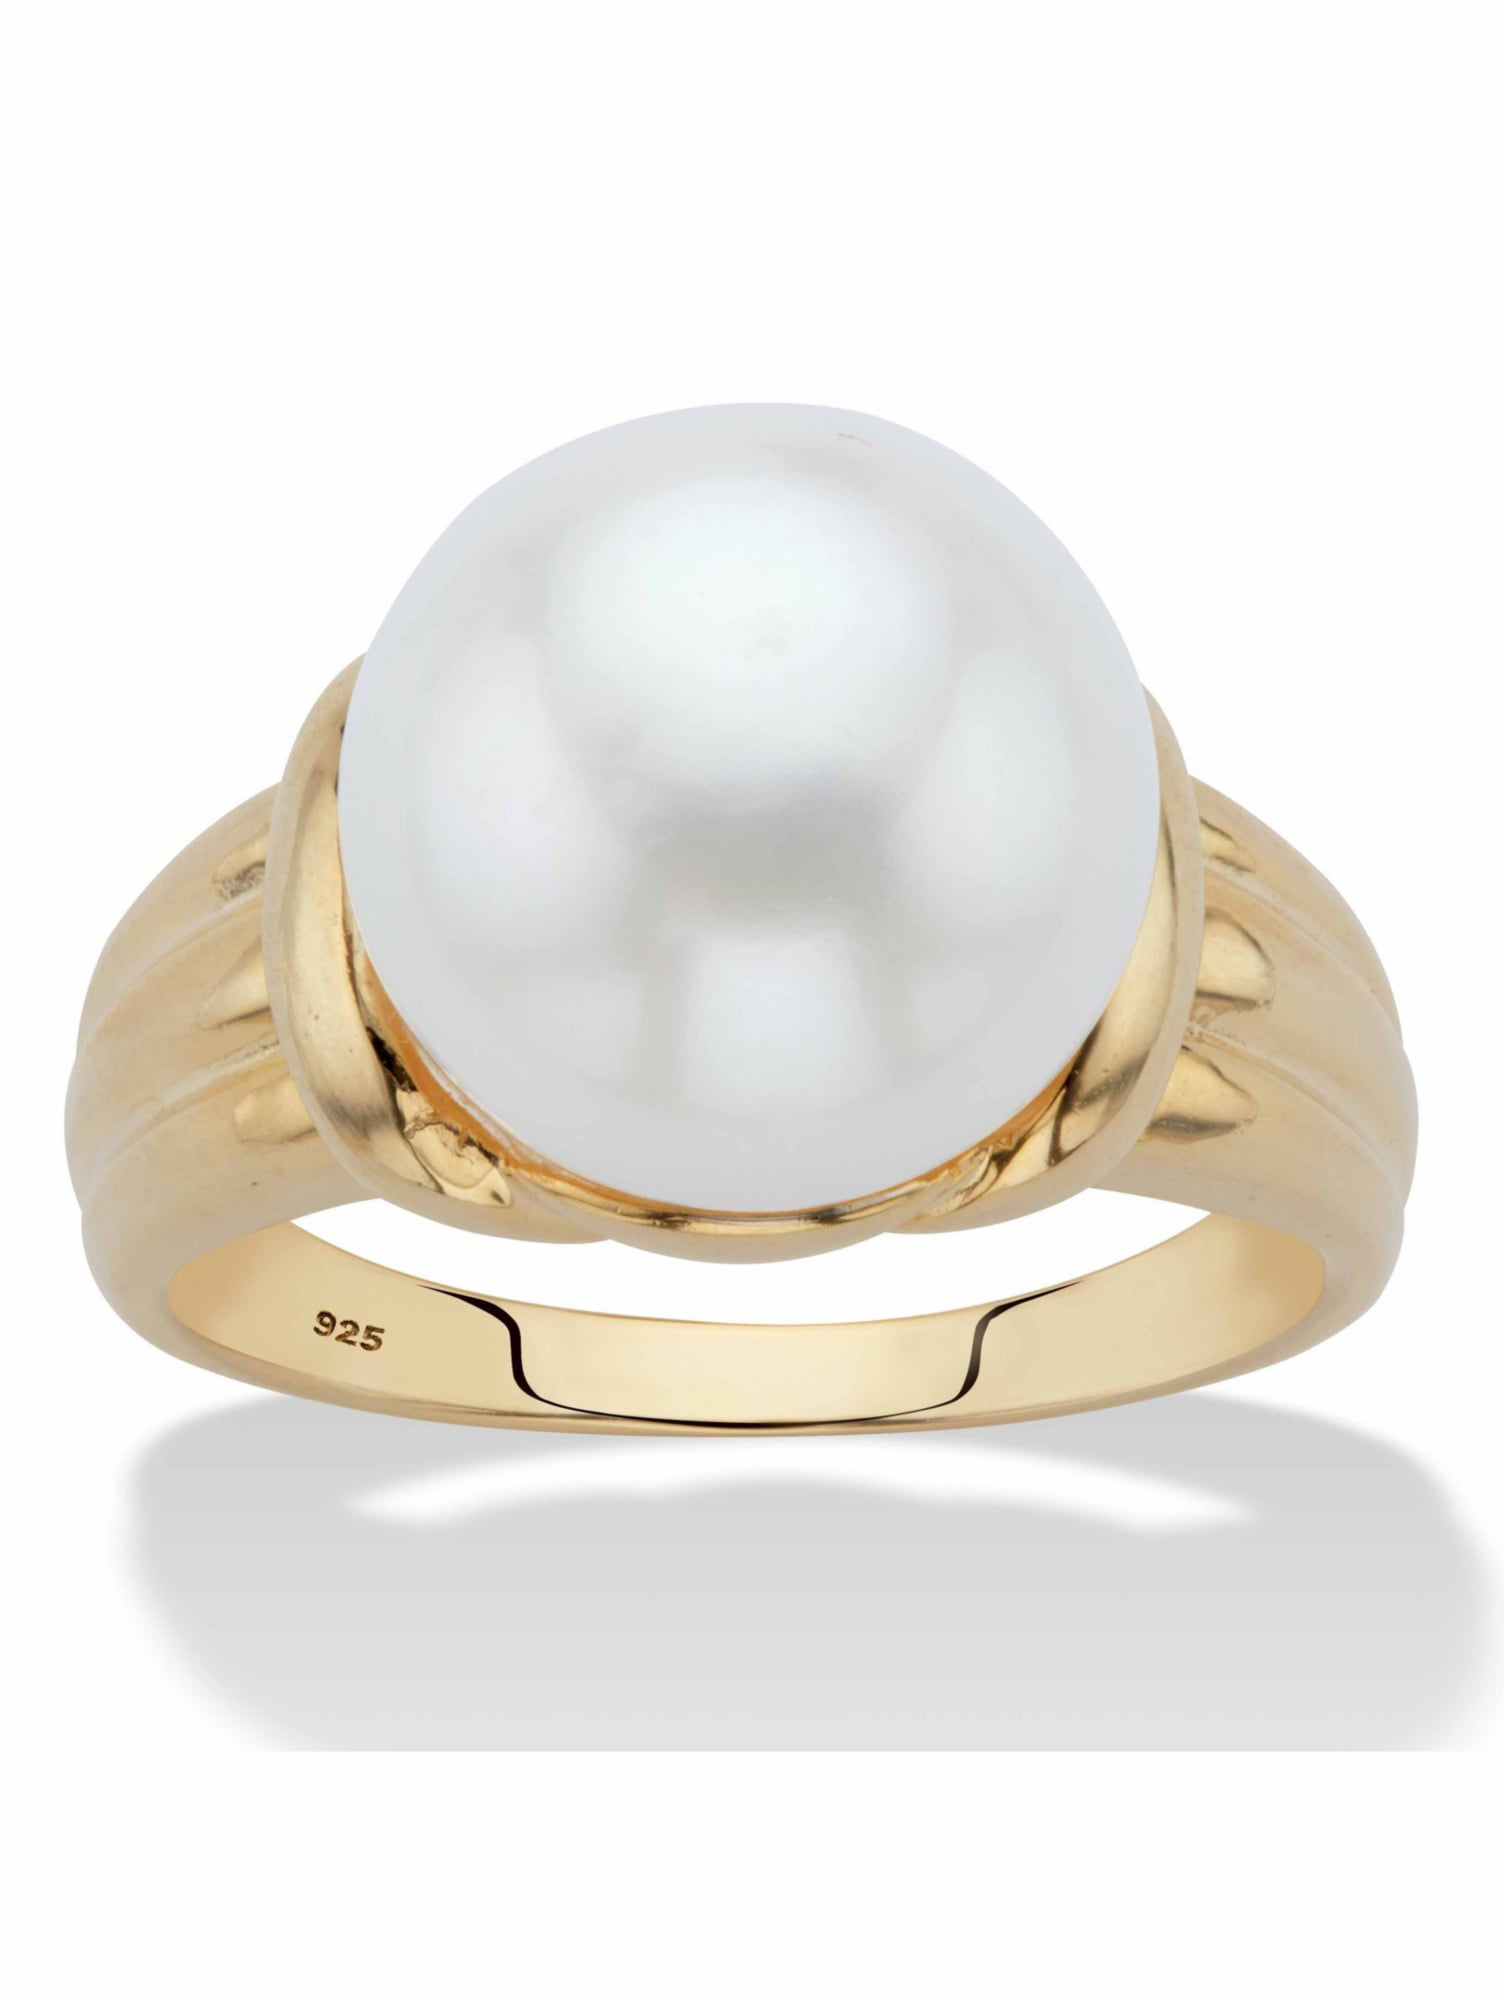 10k or 14k Solid Gold 3 Row CZ Freshwater Cultured Pearl Fancy Ring Jewelry 